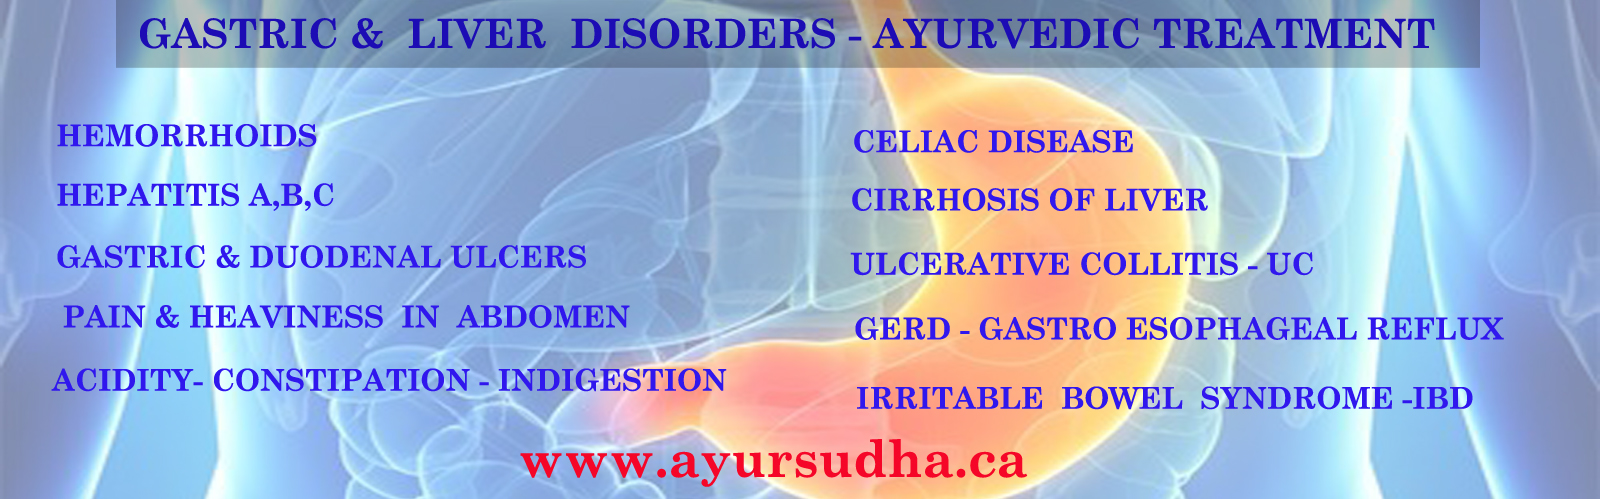 GASTRIC & LIVER DISORDERS